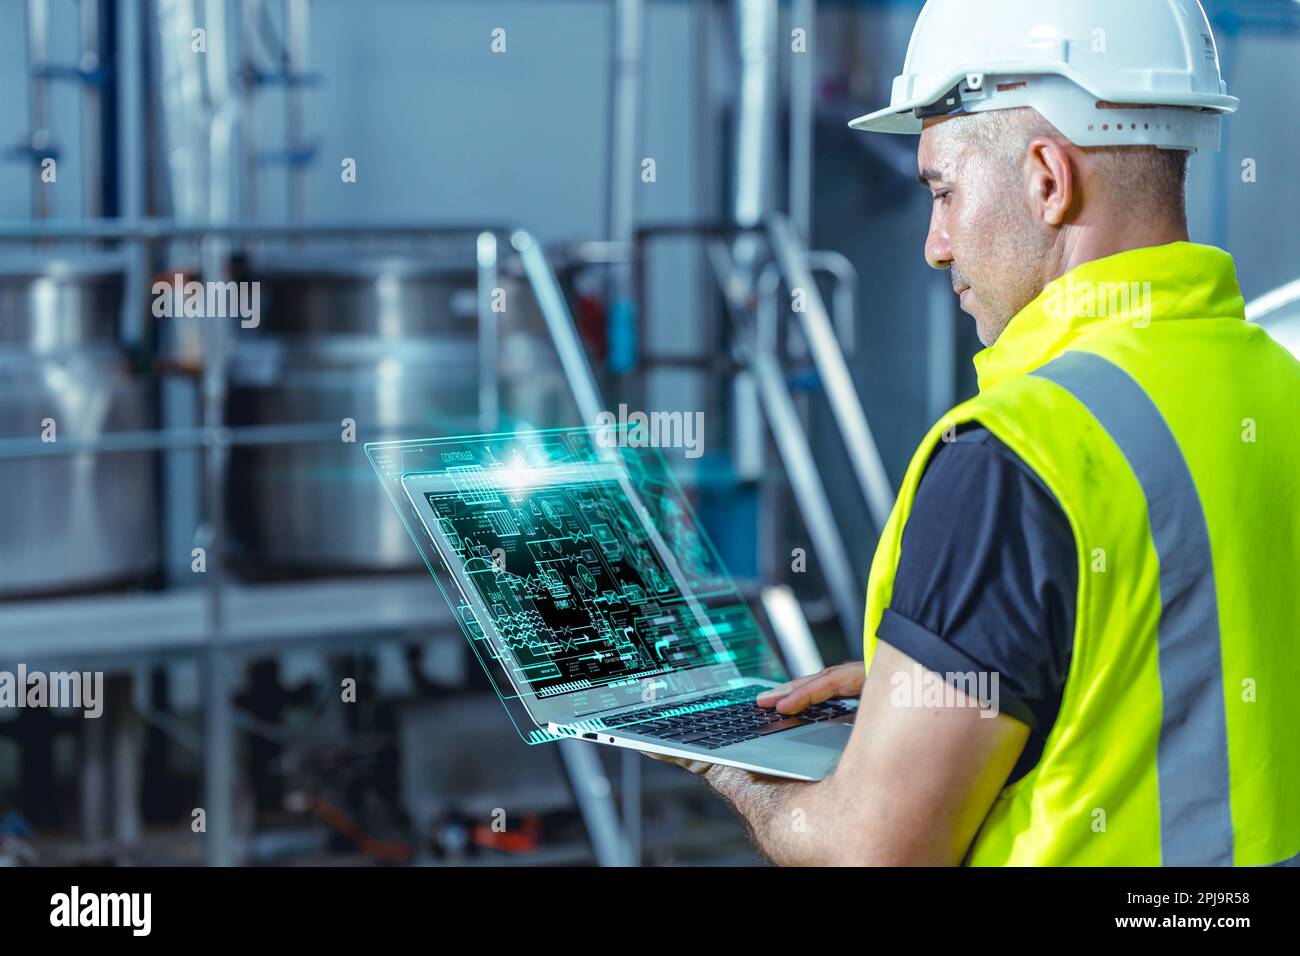 Smart engineer worker using software on laptop to monitor check factory boiler pipe valve control system Stock Photo